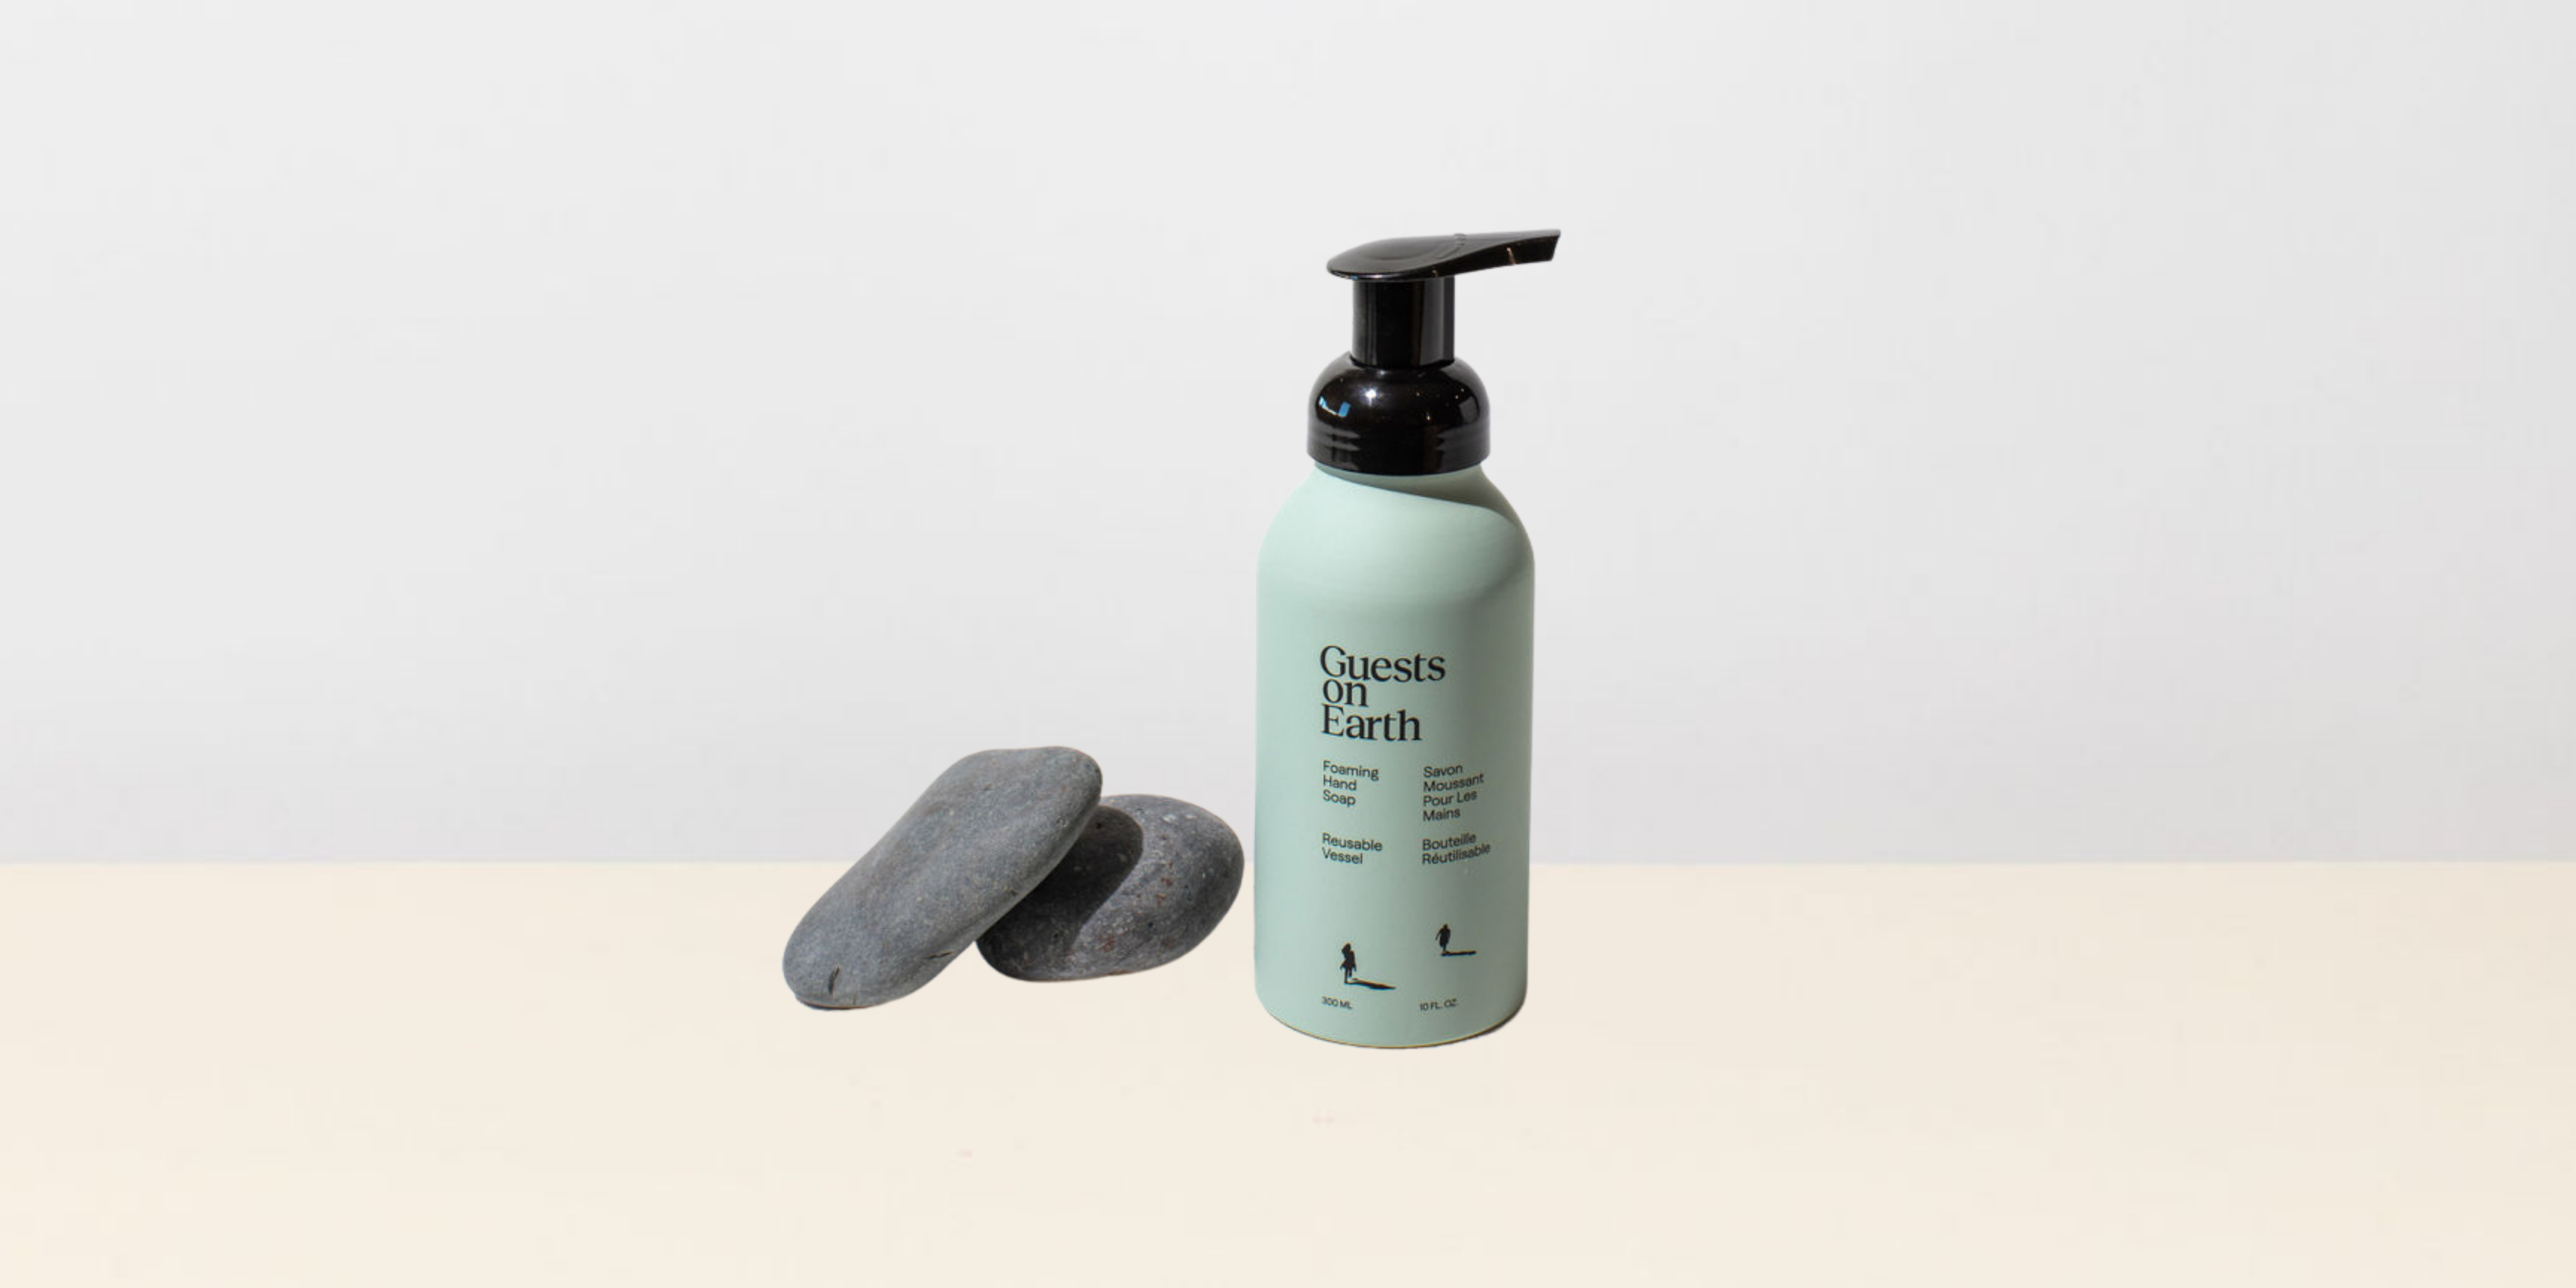 Reusable Guests on Earth foaming soap bottle next to stones